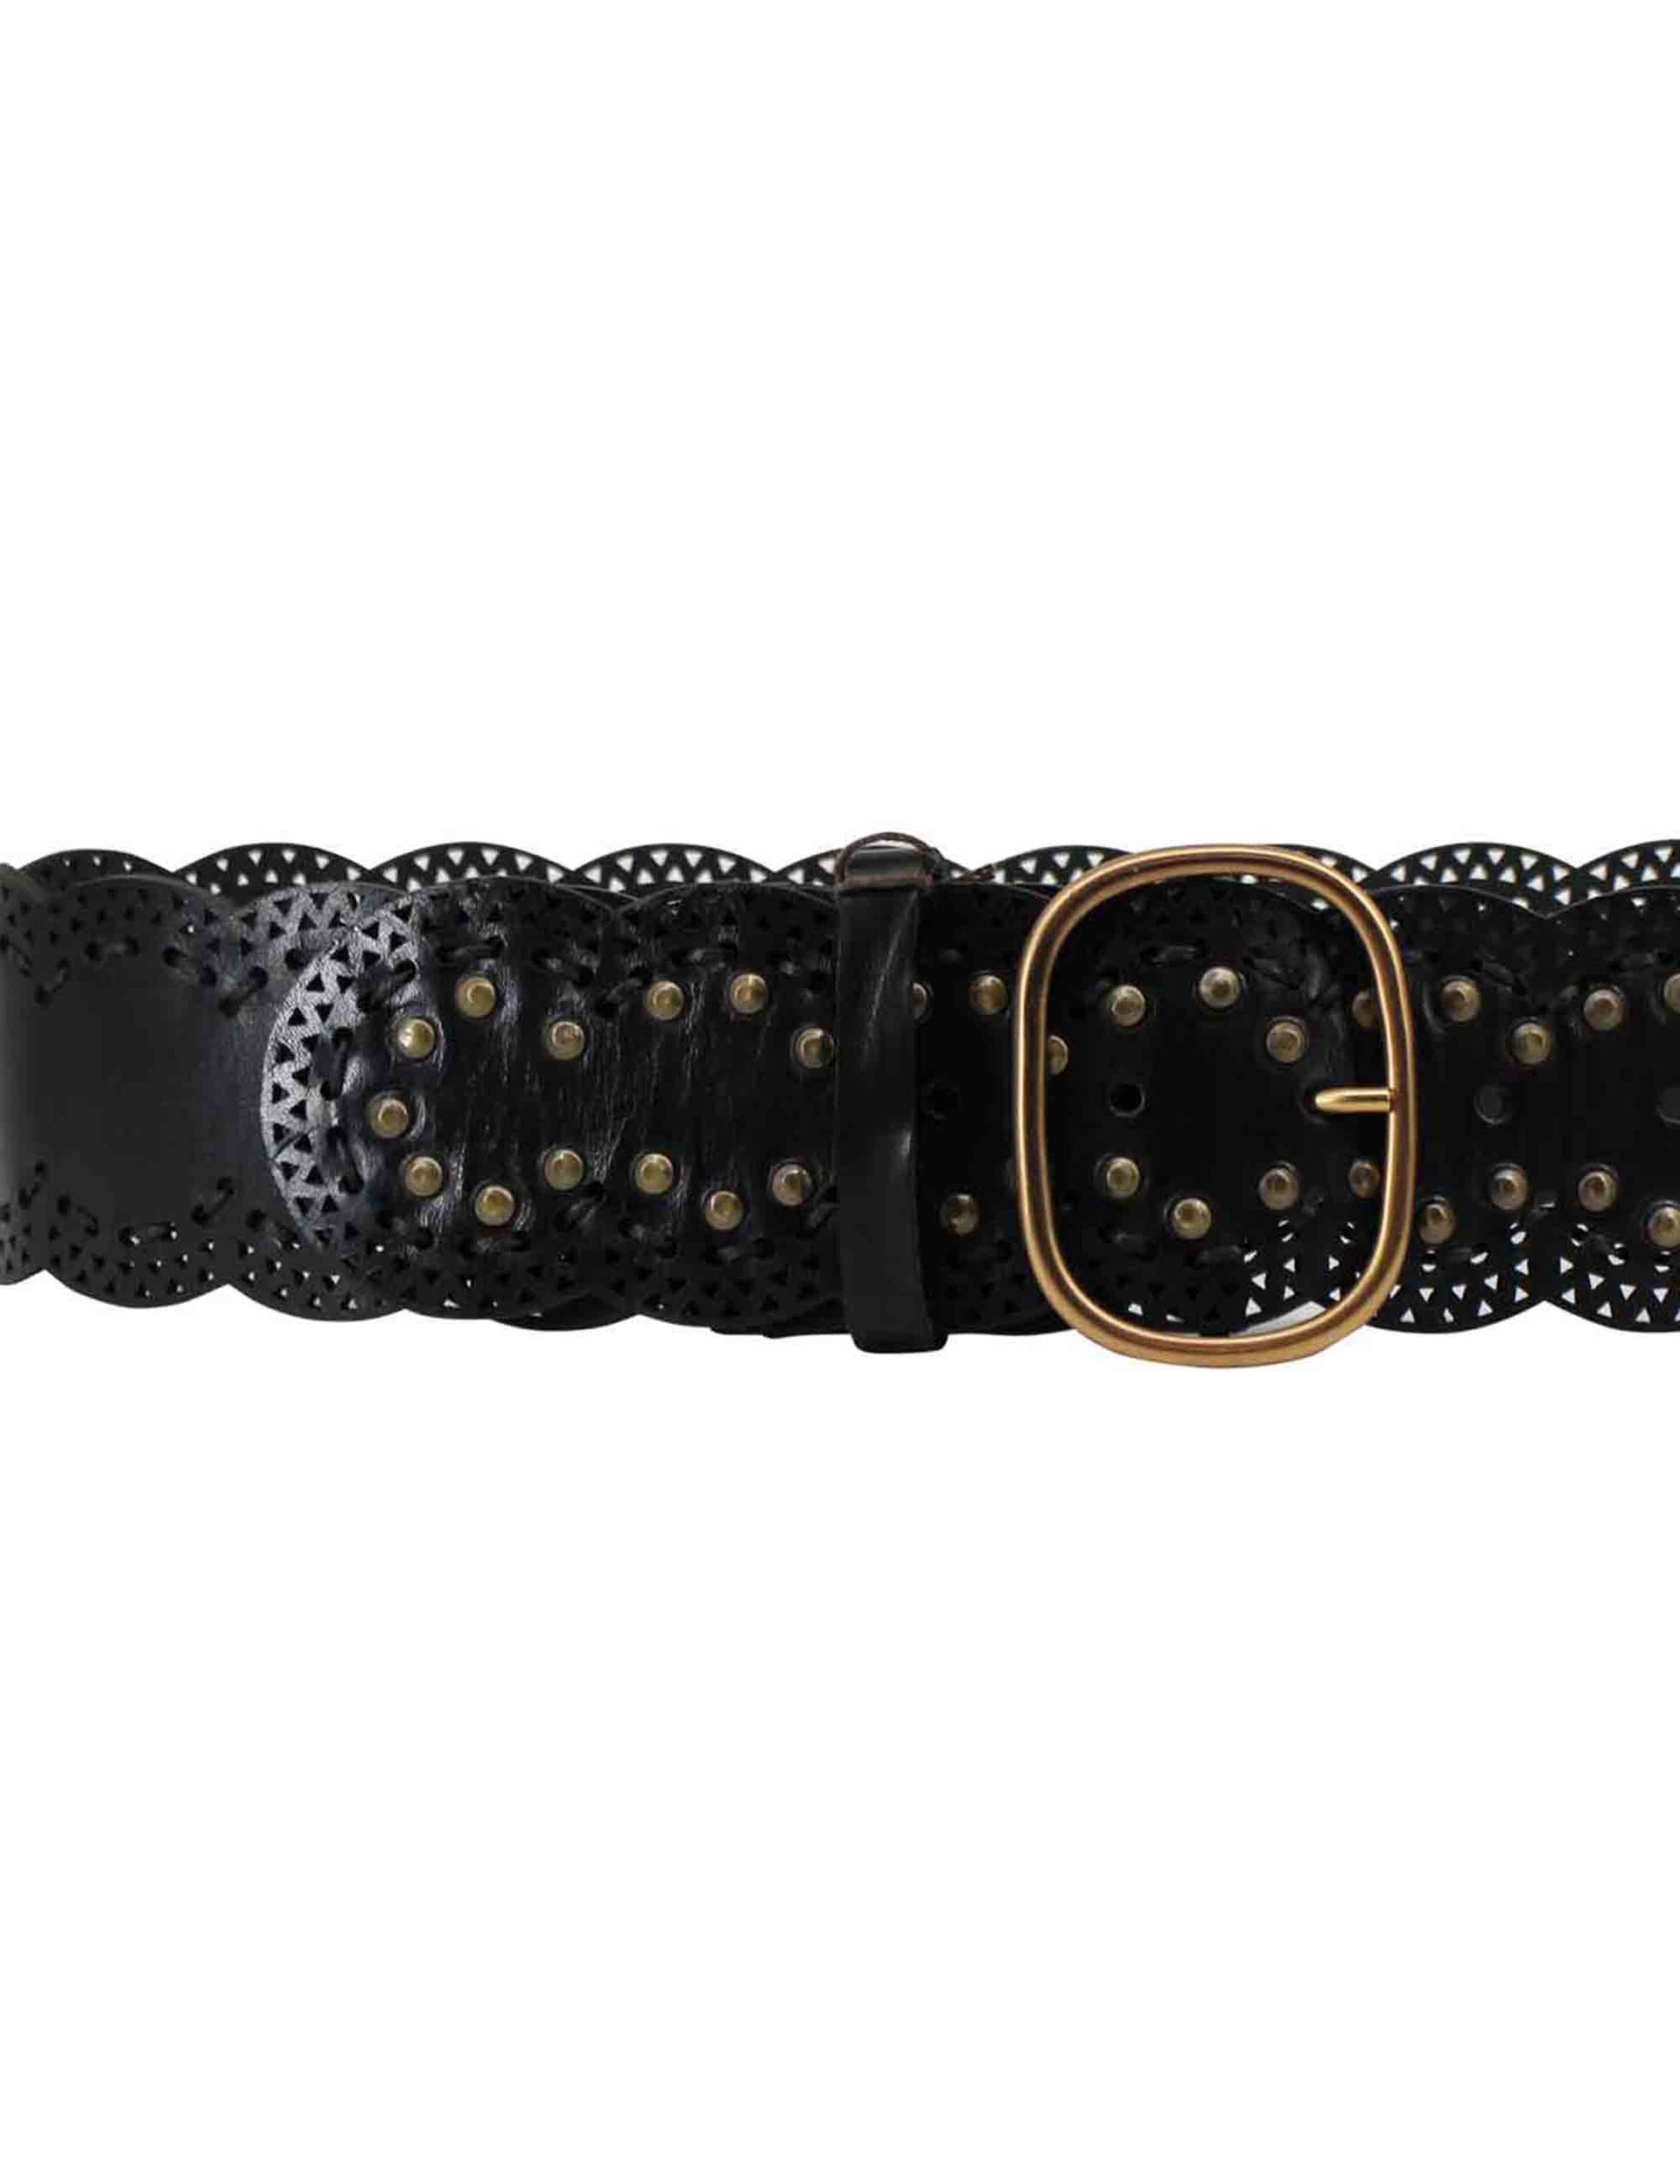 Women's black leather belts with buckle and studs